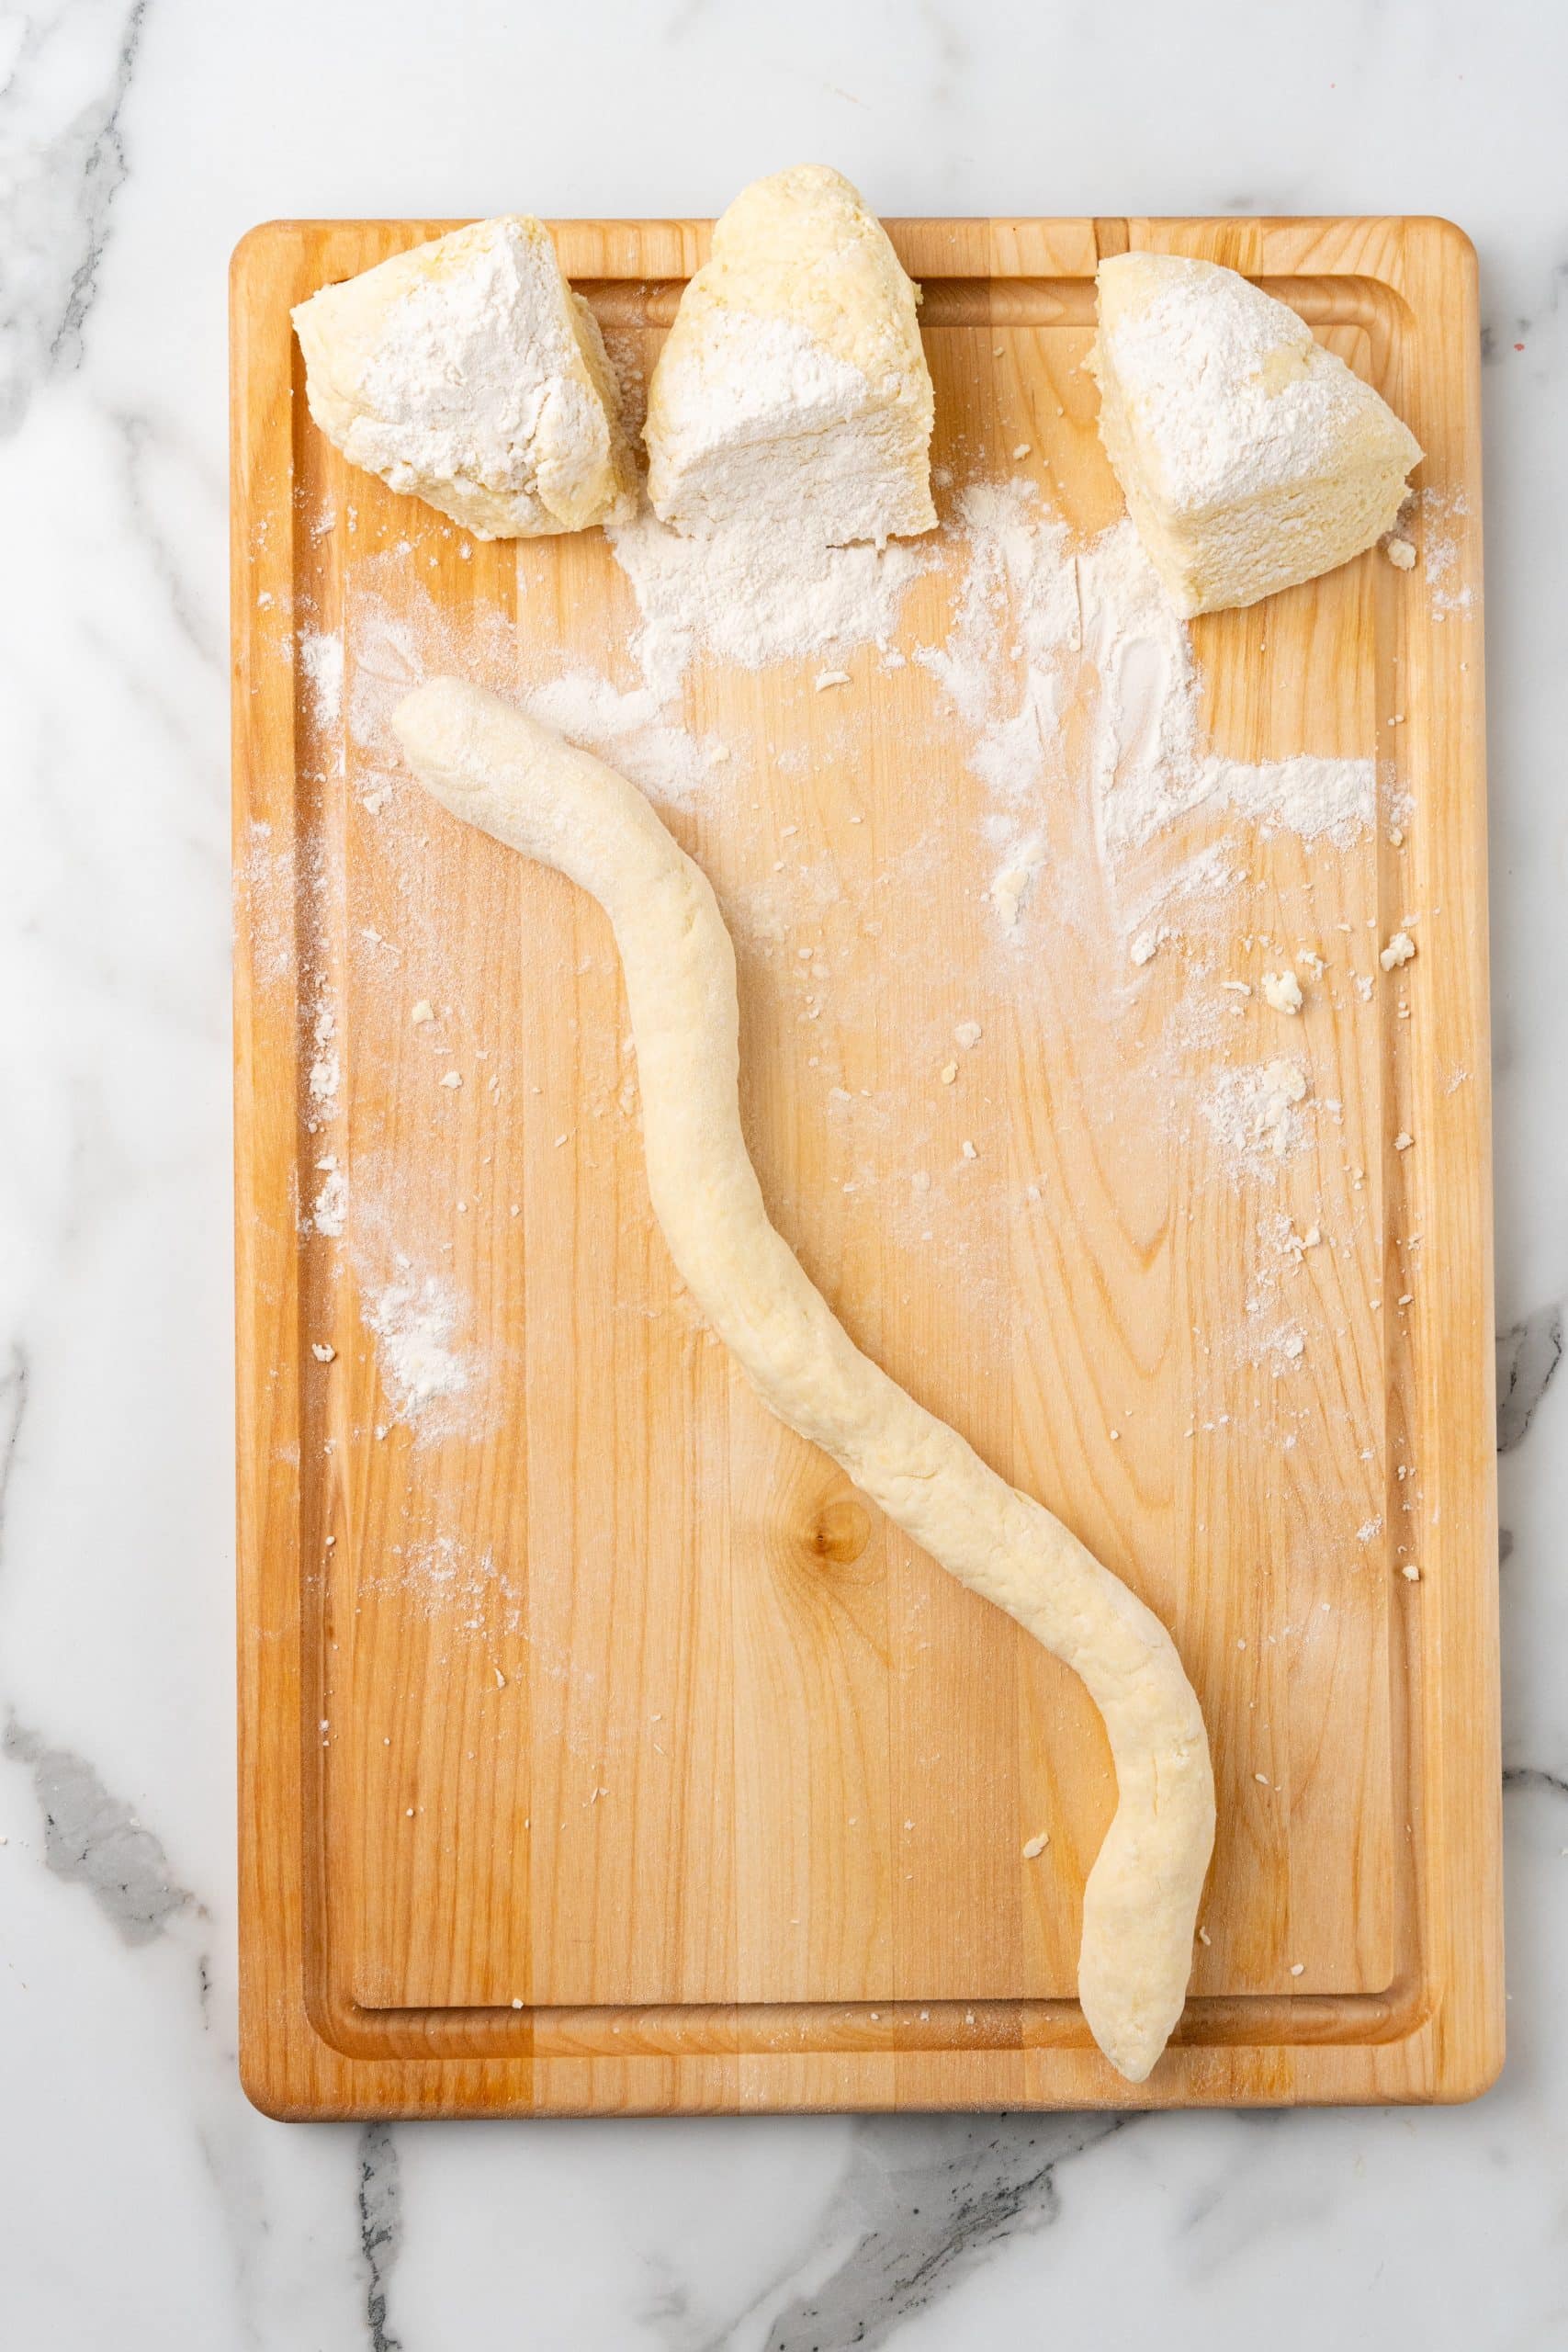 easy gnocchi dough rolled into a long rope on a floured wooden cutting board